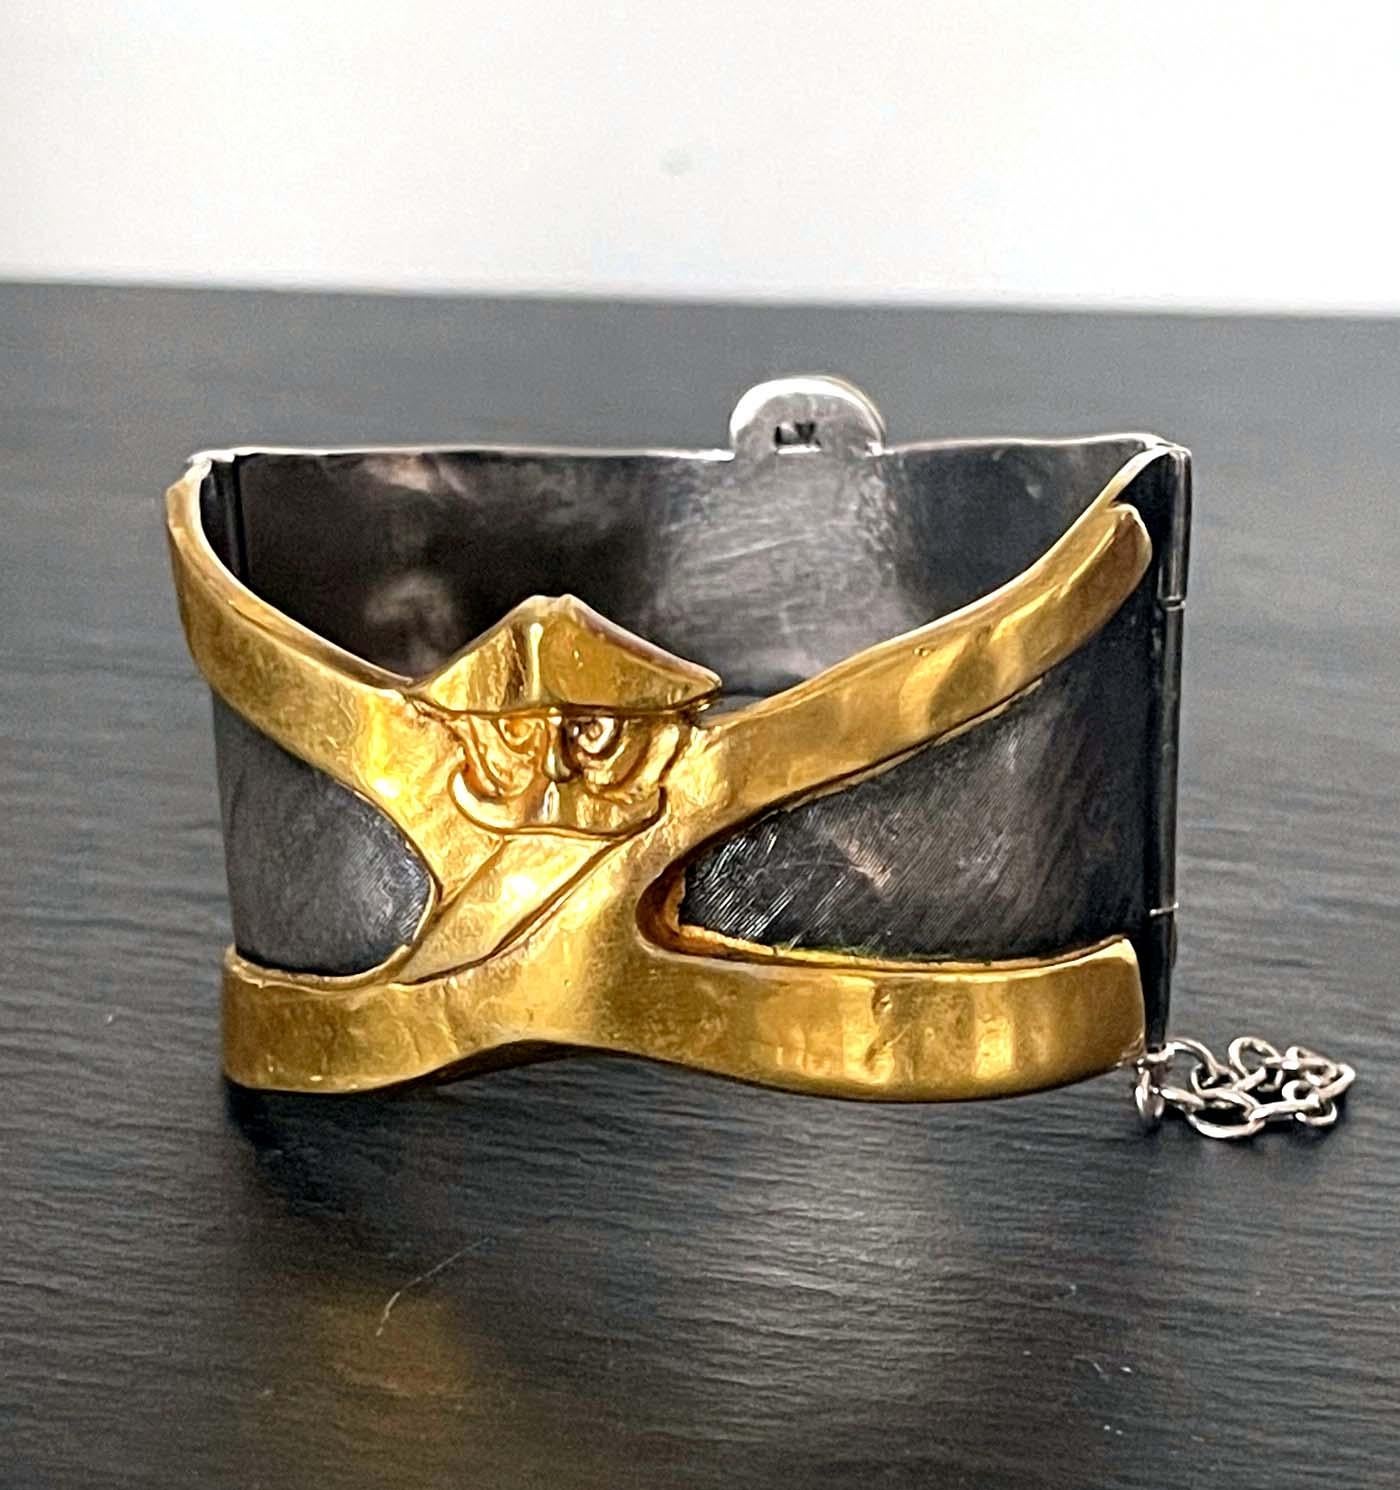 A rare cuff bracelet in gilded and silvered bronze by Parisian art jewller Line Vautrin (1913-1997). The playful piece is called 